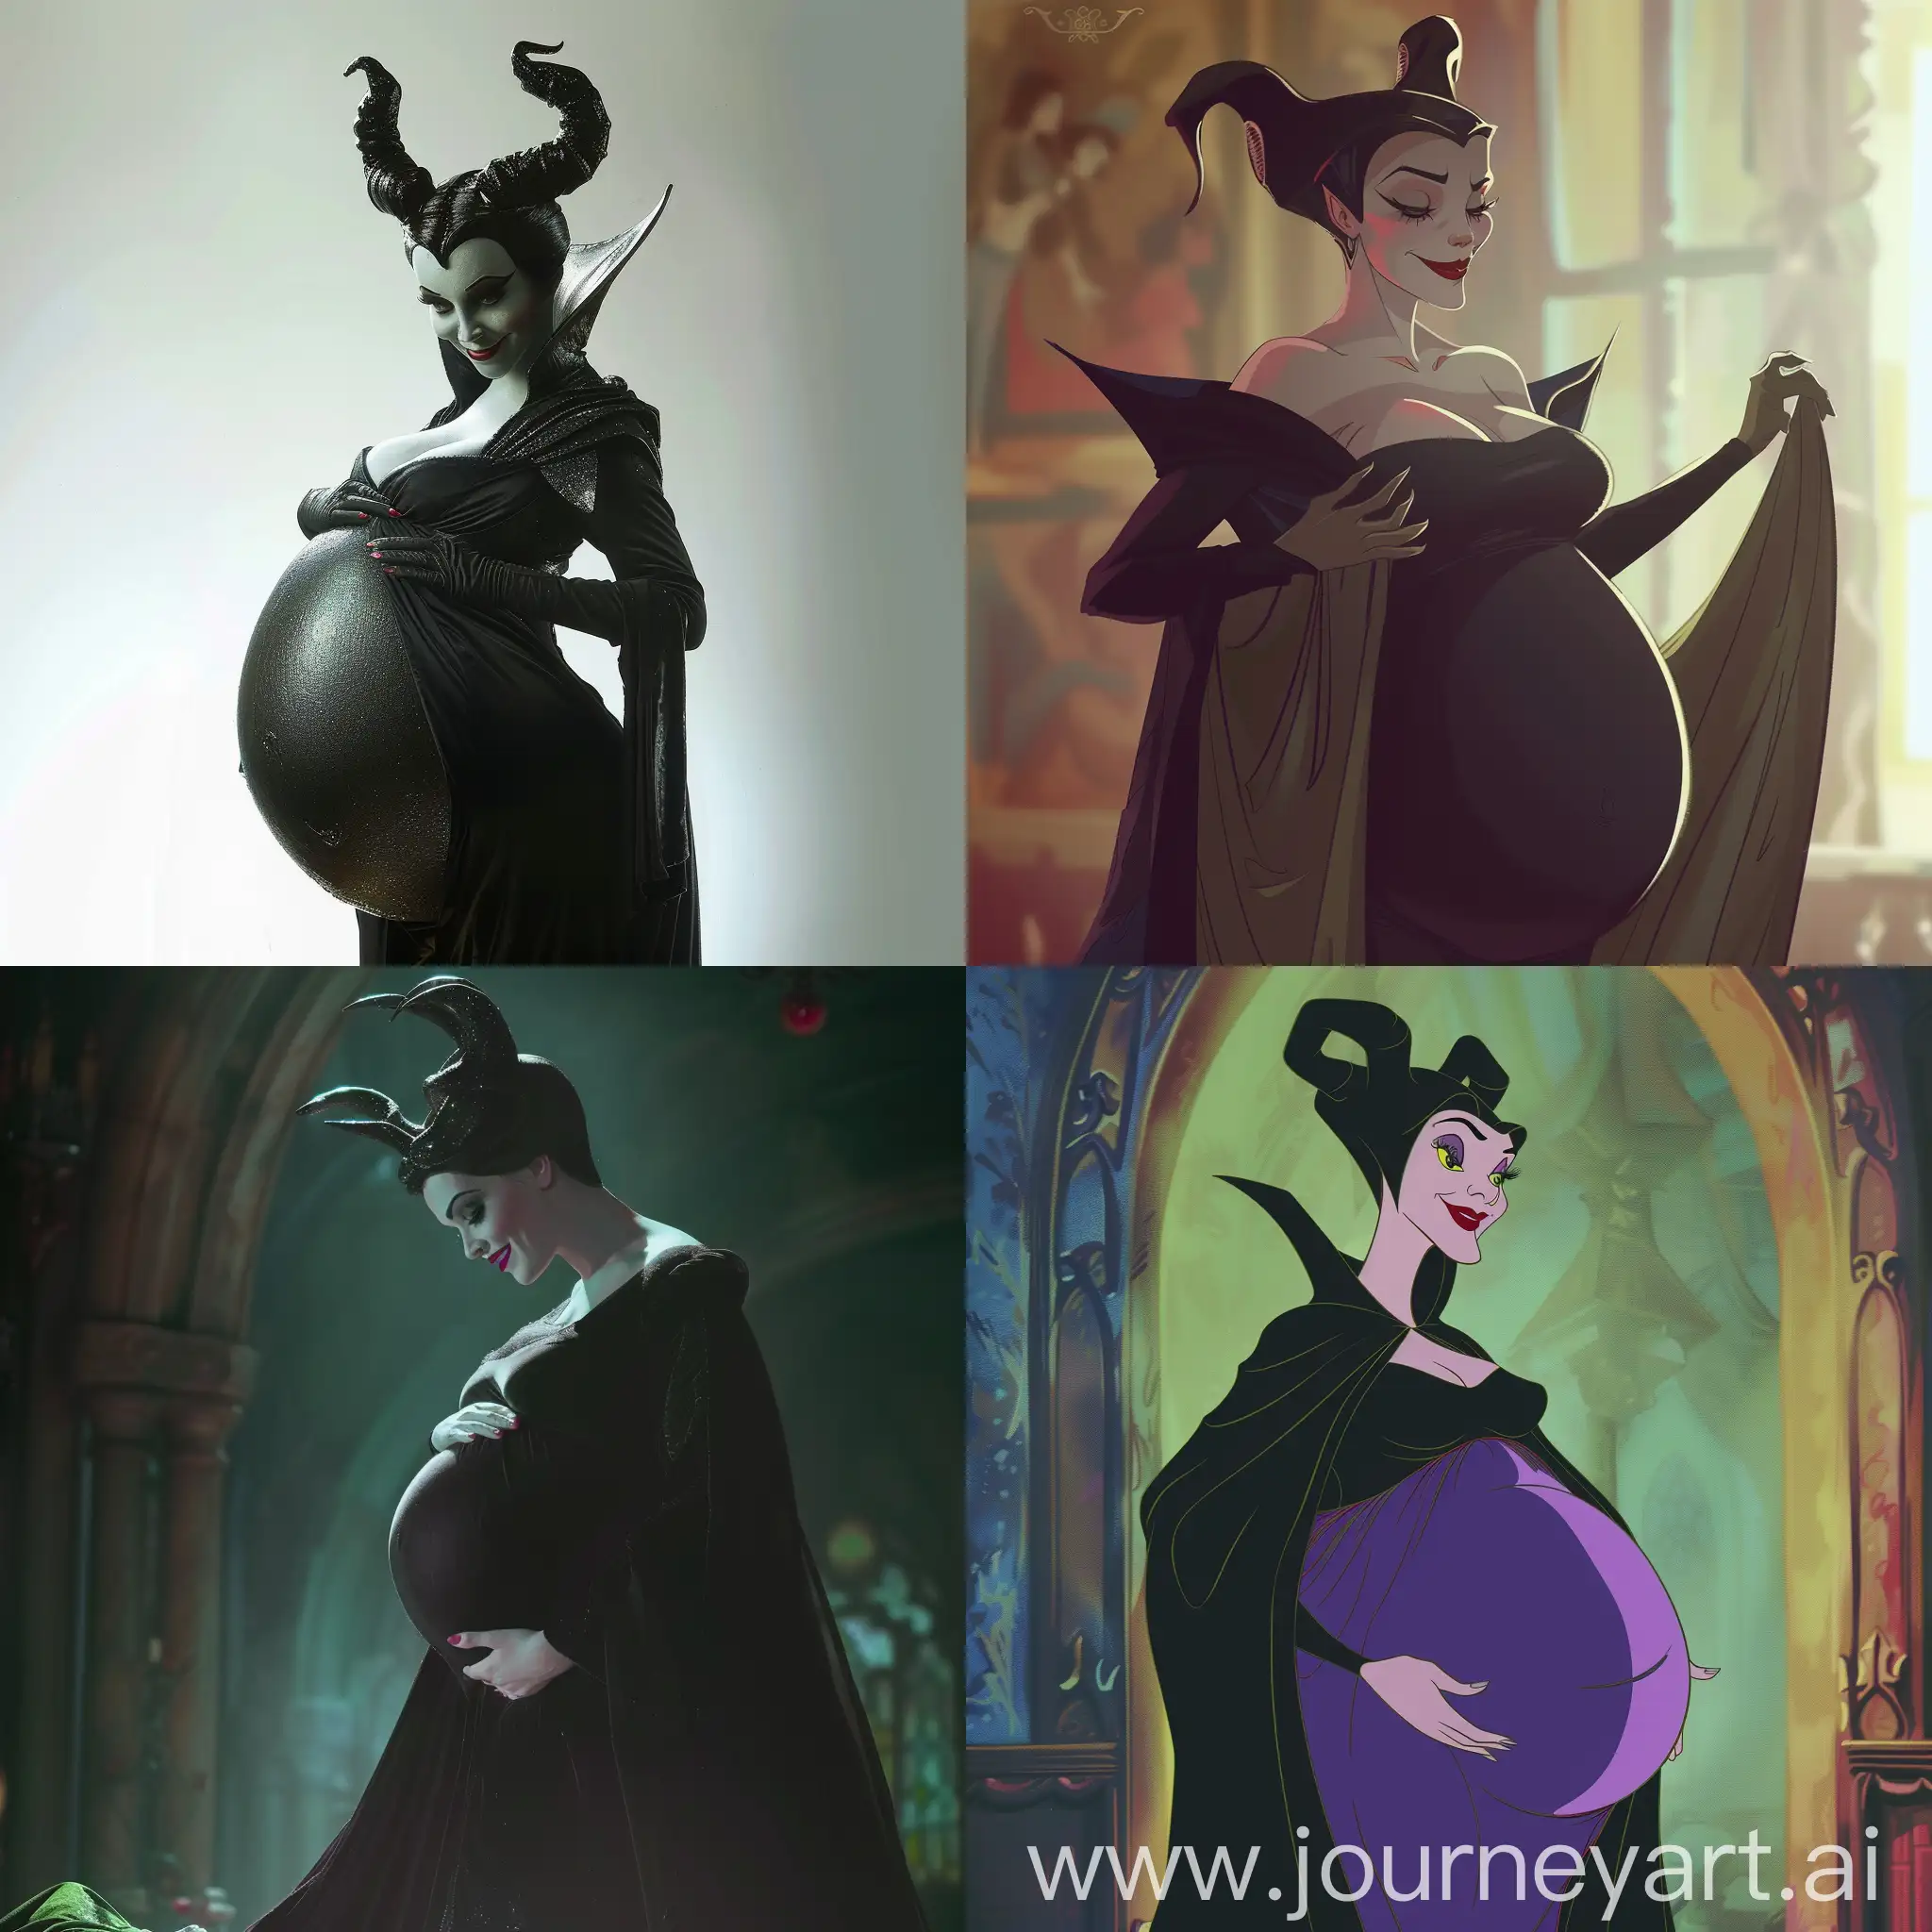 Maleficent, Very Pregnant, Her Pregnant belly is very large.